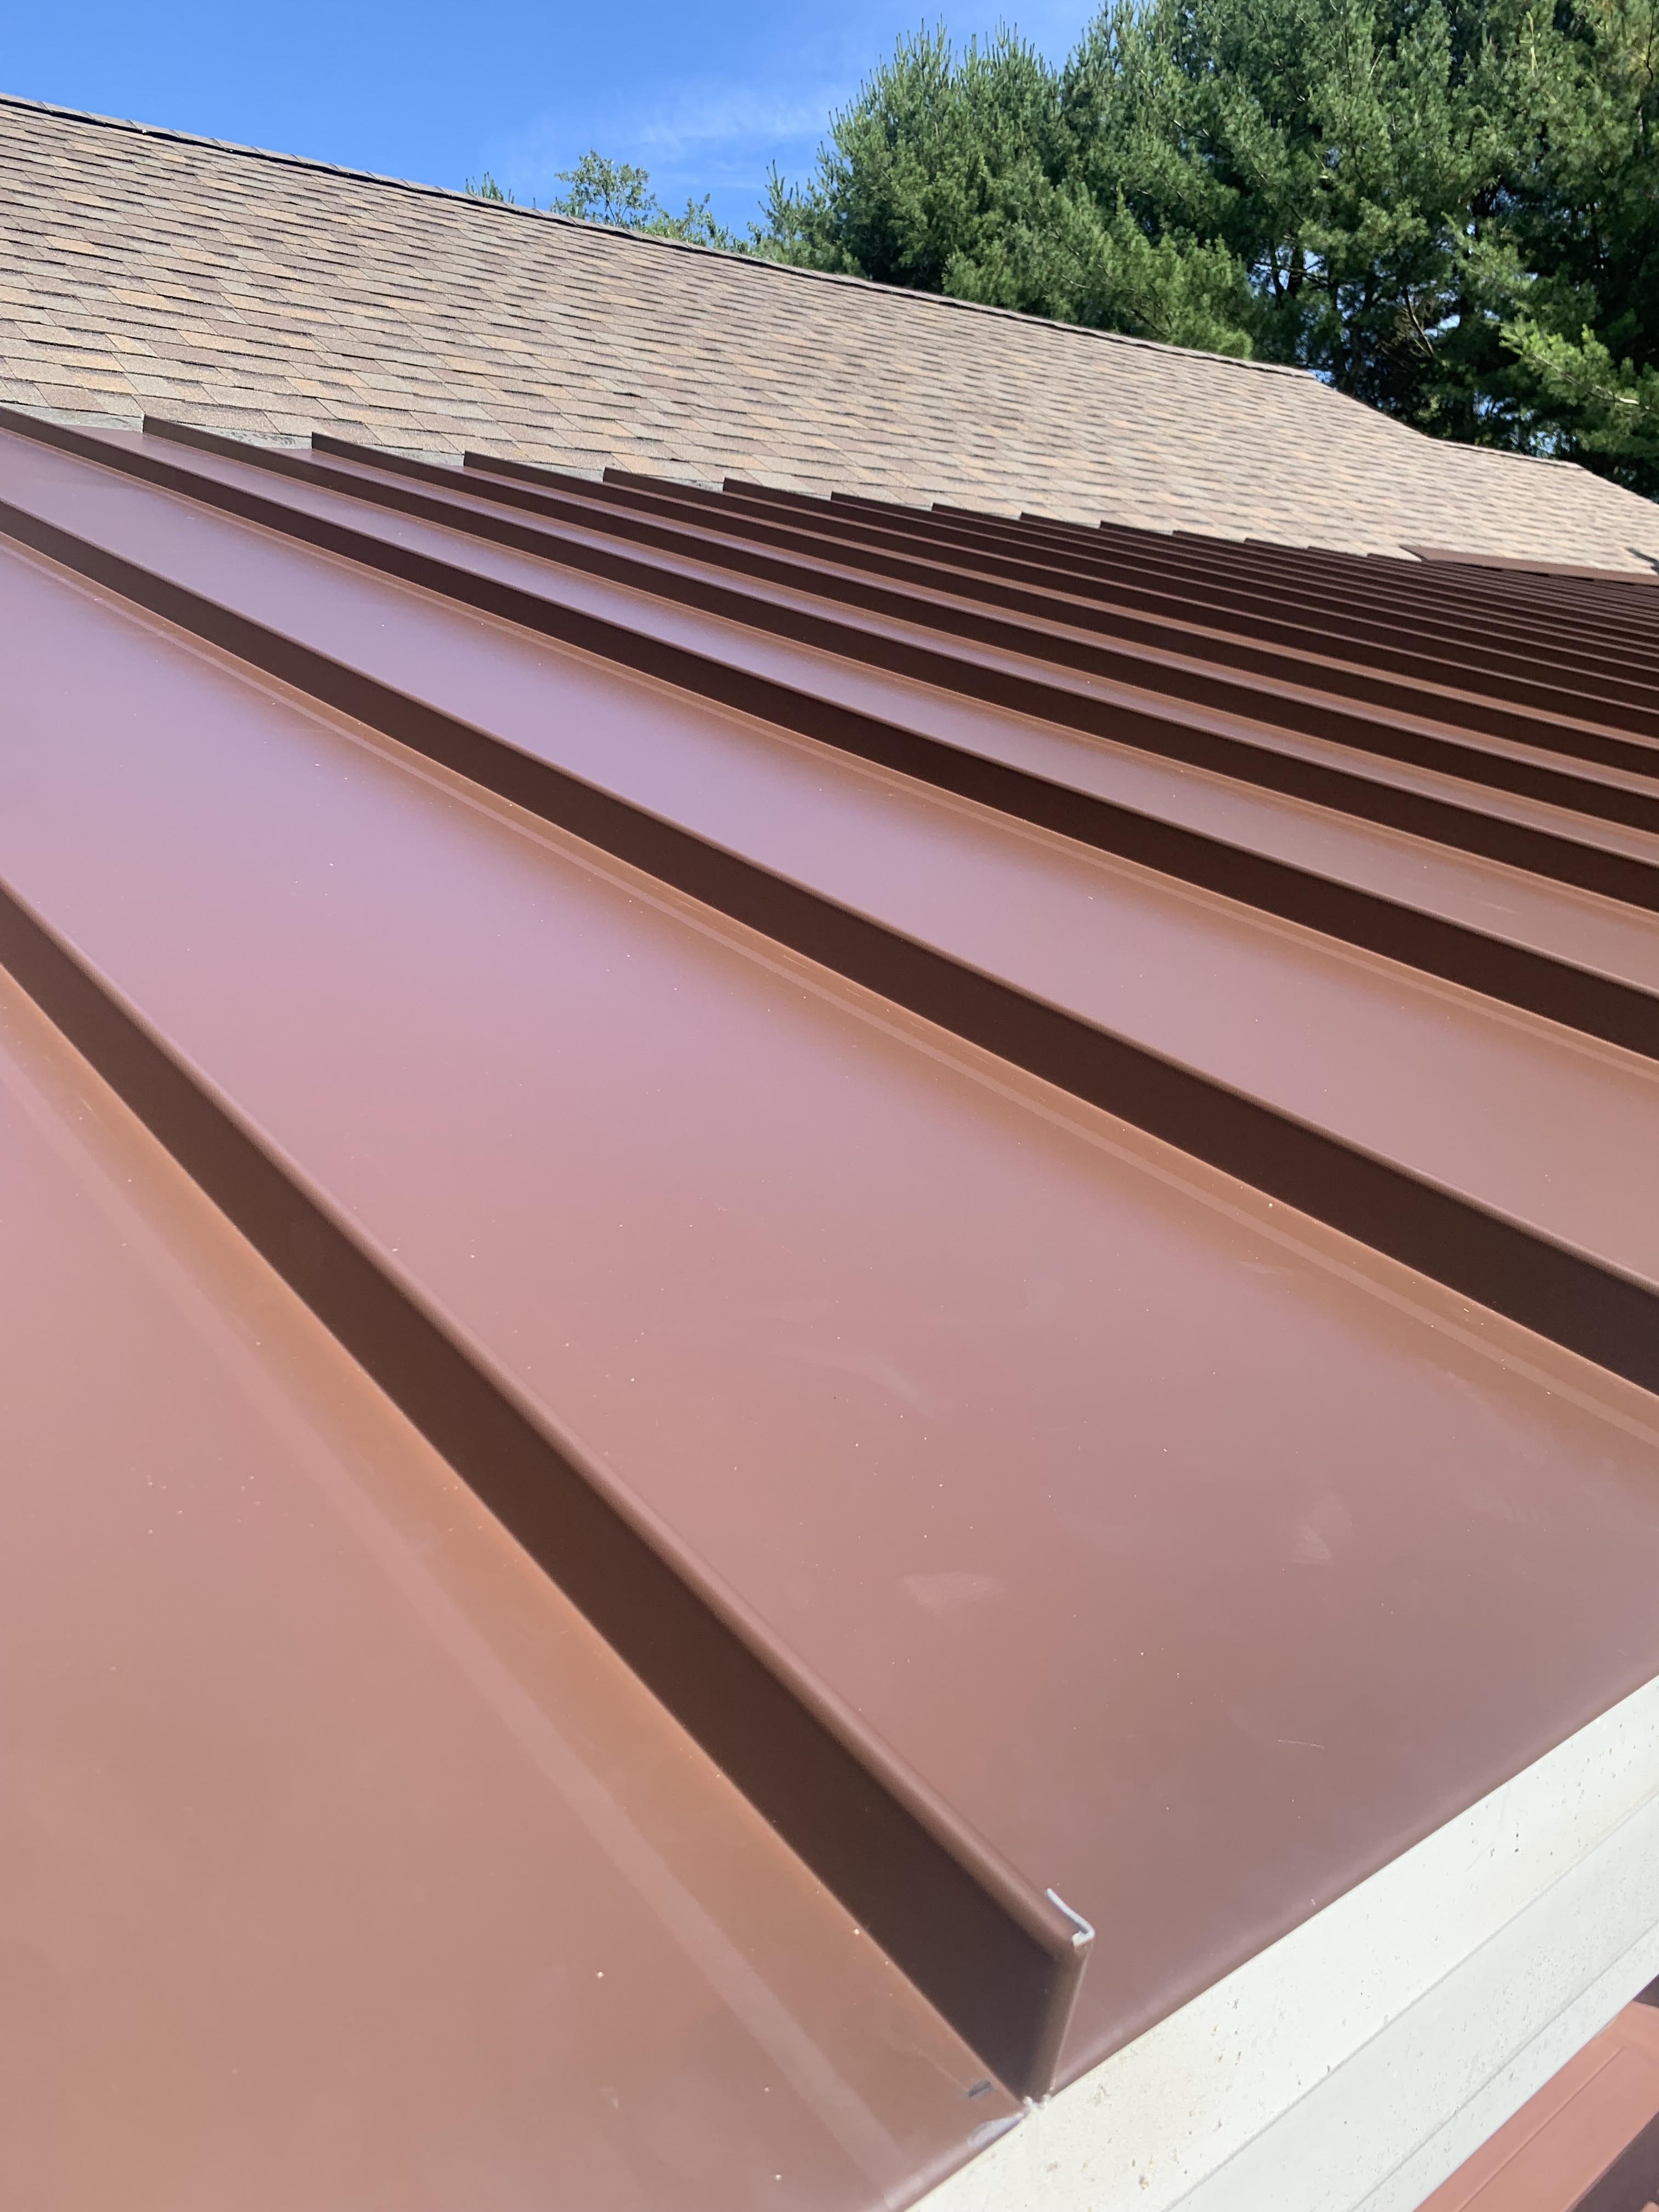 Metal Roofing Installation Installed By Our Company: Seapoint Roofing and Siding Top Quality Metal Roofing Installation In Ocean City, NJ Thumbnail